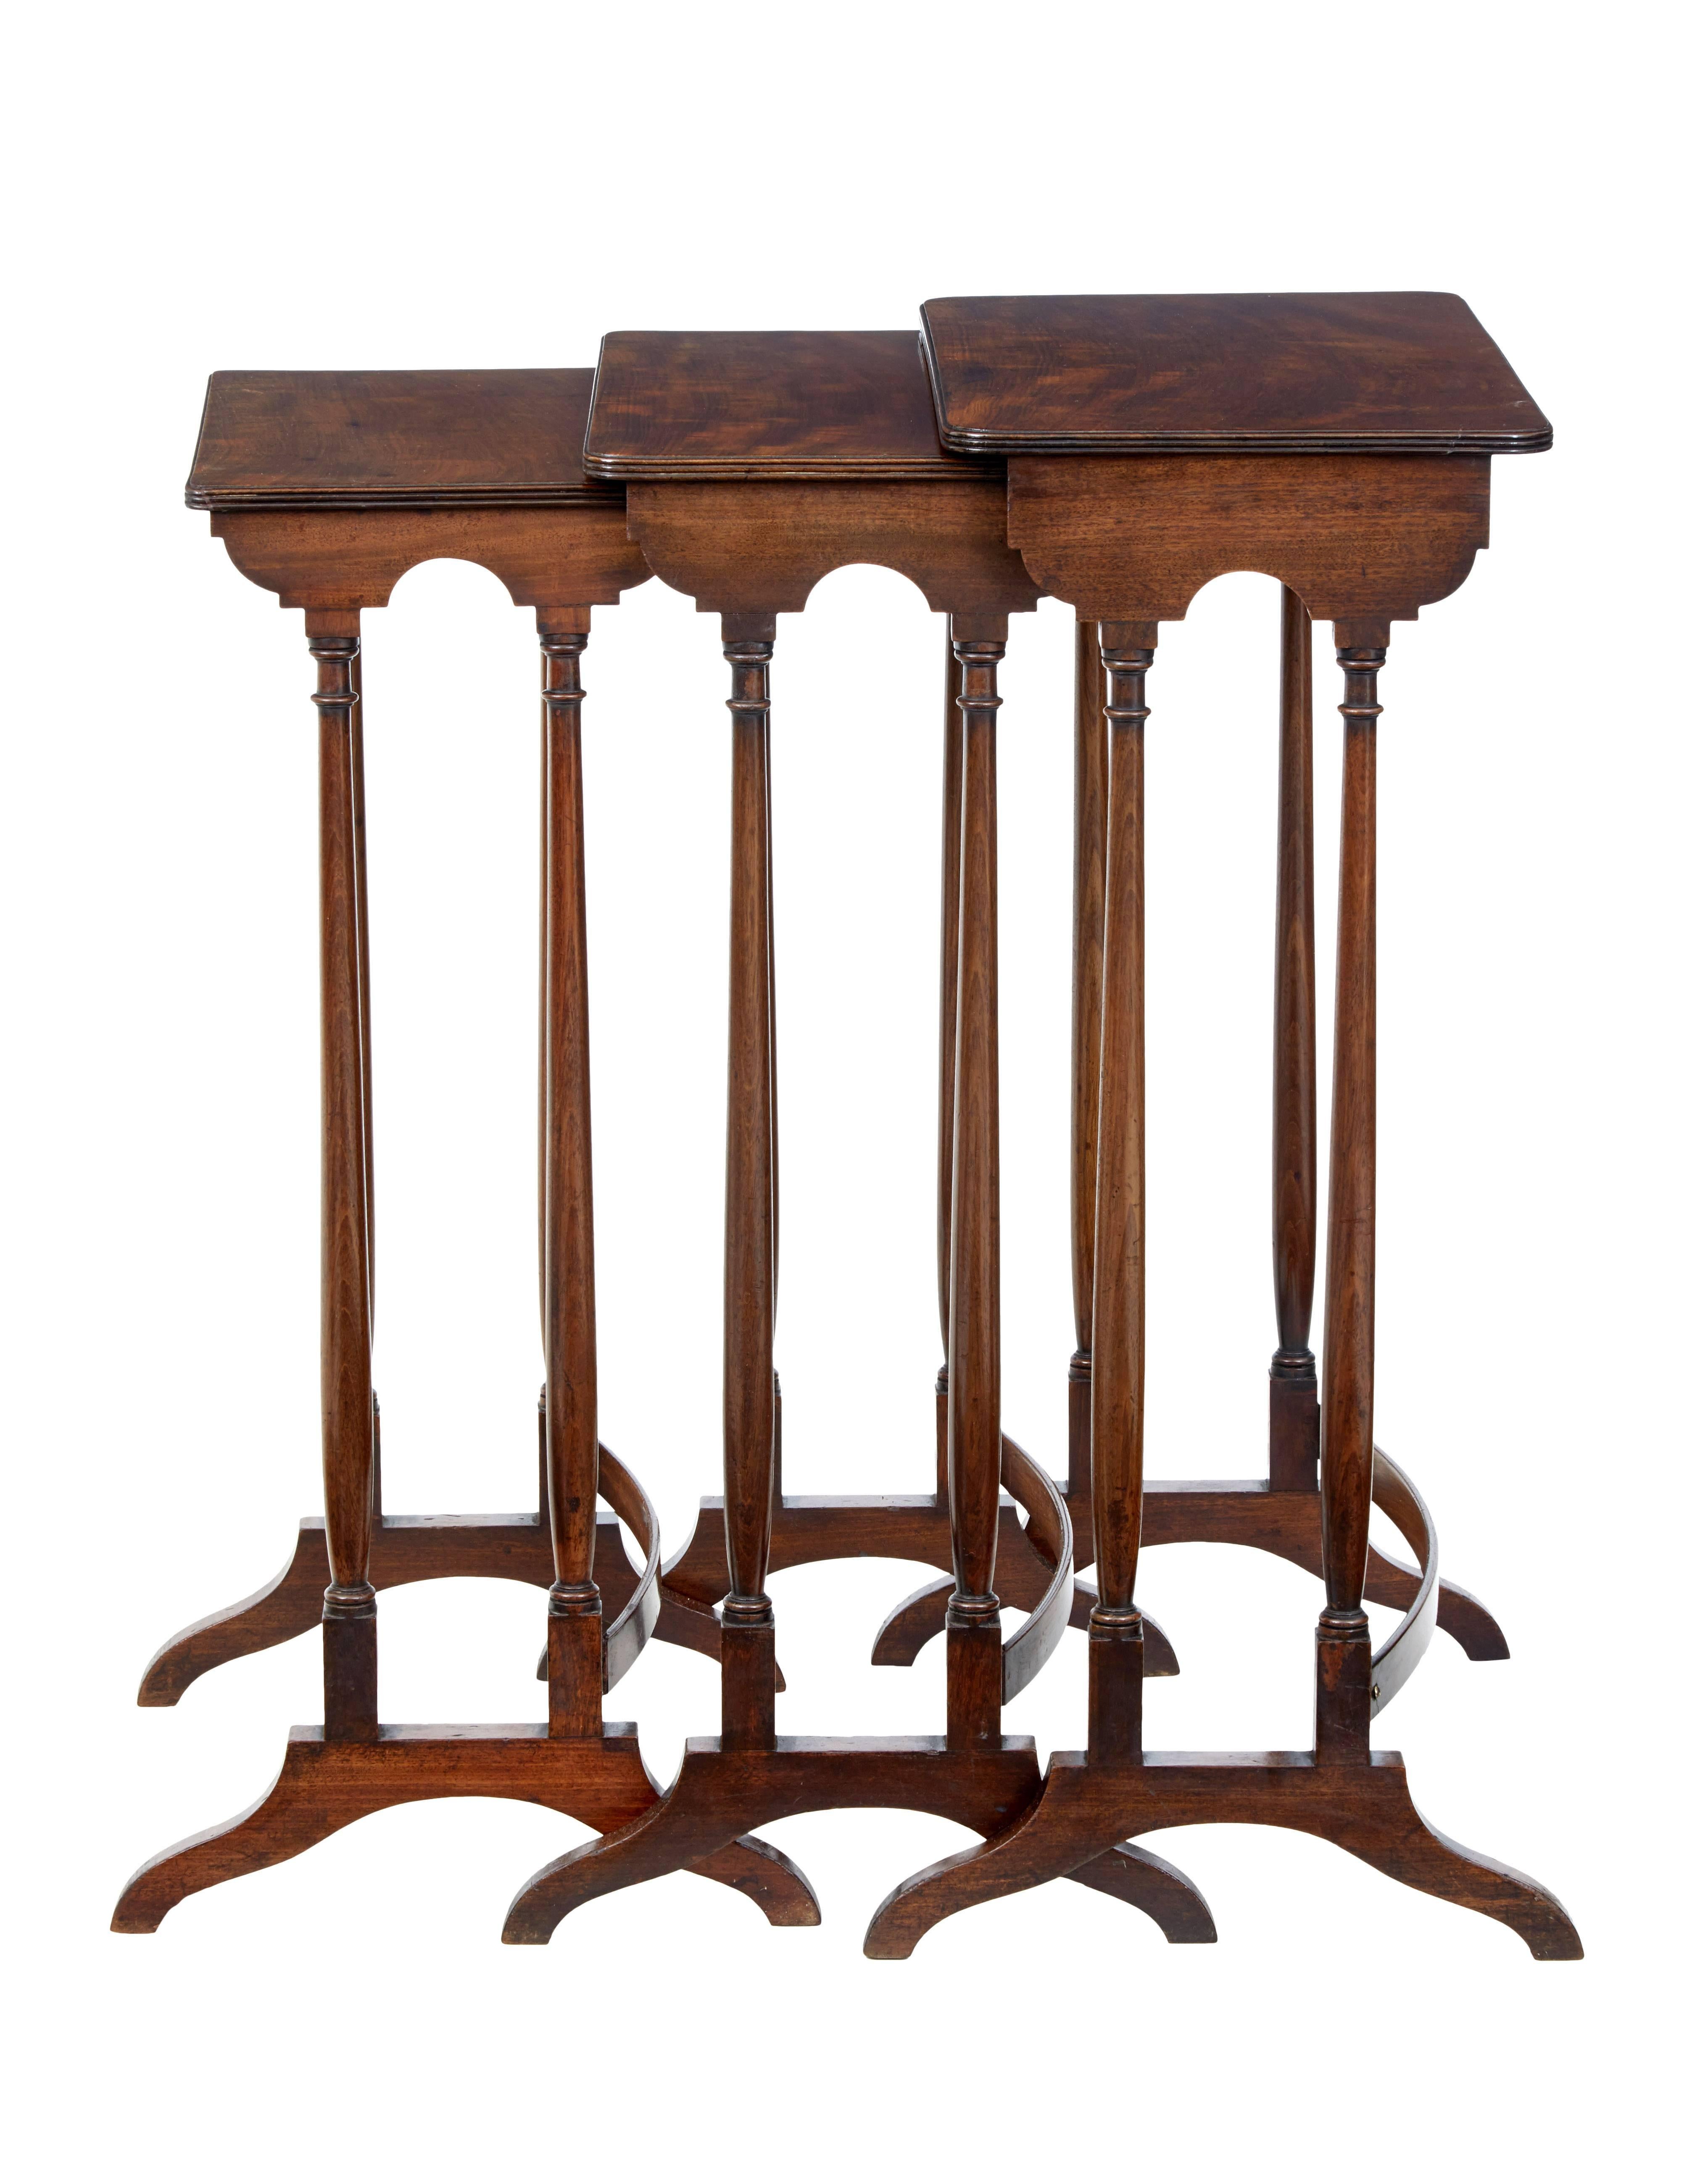 Fine set of English nesting tables, circa 1860.

Beautiful mahogany tops with good color and patina. Each standing on turned legs and shaped back stretcher.

Elegant set ready to use in the home.

Heights range from 28 1/4